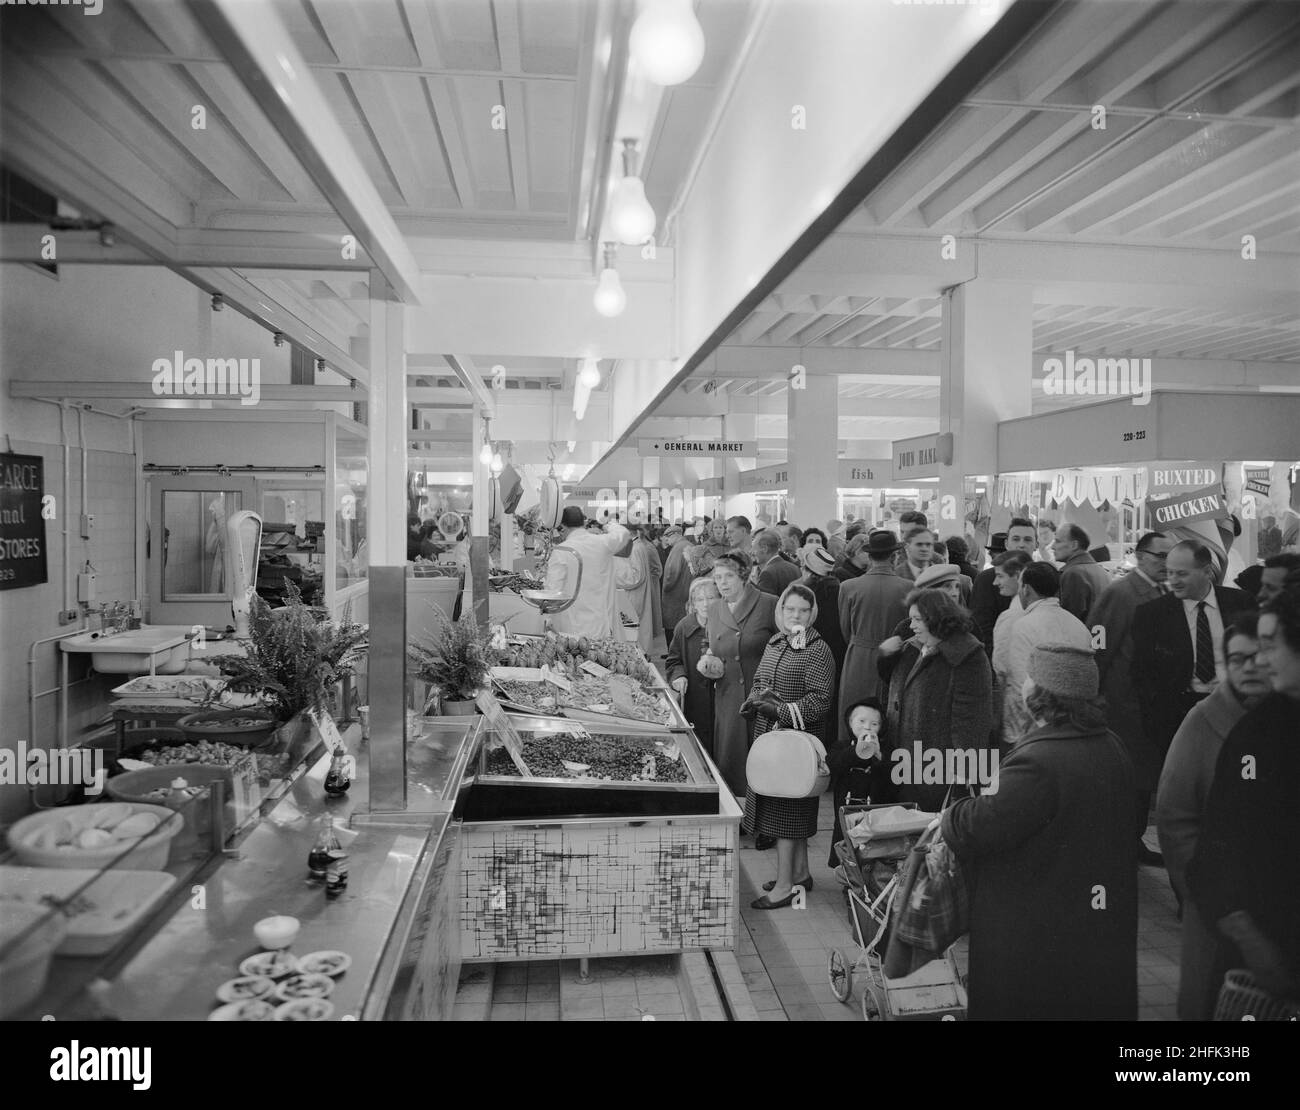 Bull Ring Centre, Birmingham, 14/11/1963. The fish market at the Bull Ring Centre bustling with shoppers on the day it opened to the public. On 14th November 1963, the retail market at the Bull Ring development was opened by the Lord Mayor of Birmingham, Alderman Dr. Louis Glass, JP. The new retail market replaced the old Market Hall building, which was originally built in 1835 but had suffered serious damage from an air strike in the Second World War. The general section of the new market housed 154 stalls, with a further 42 in the separate fish and poultry section. Stock Photo